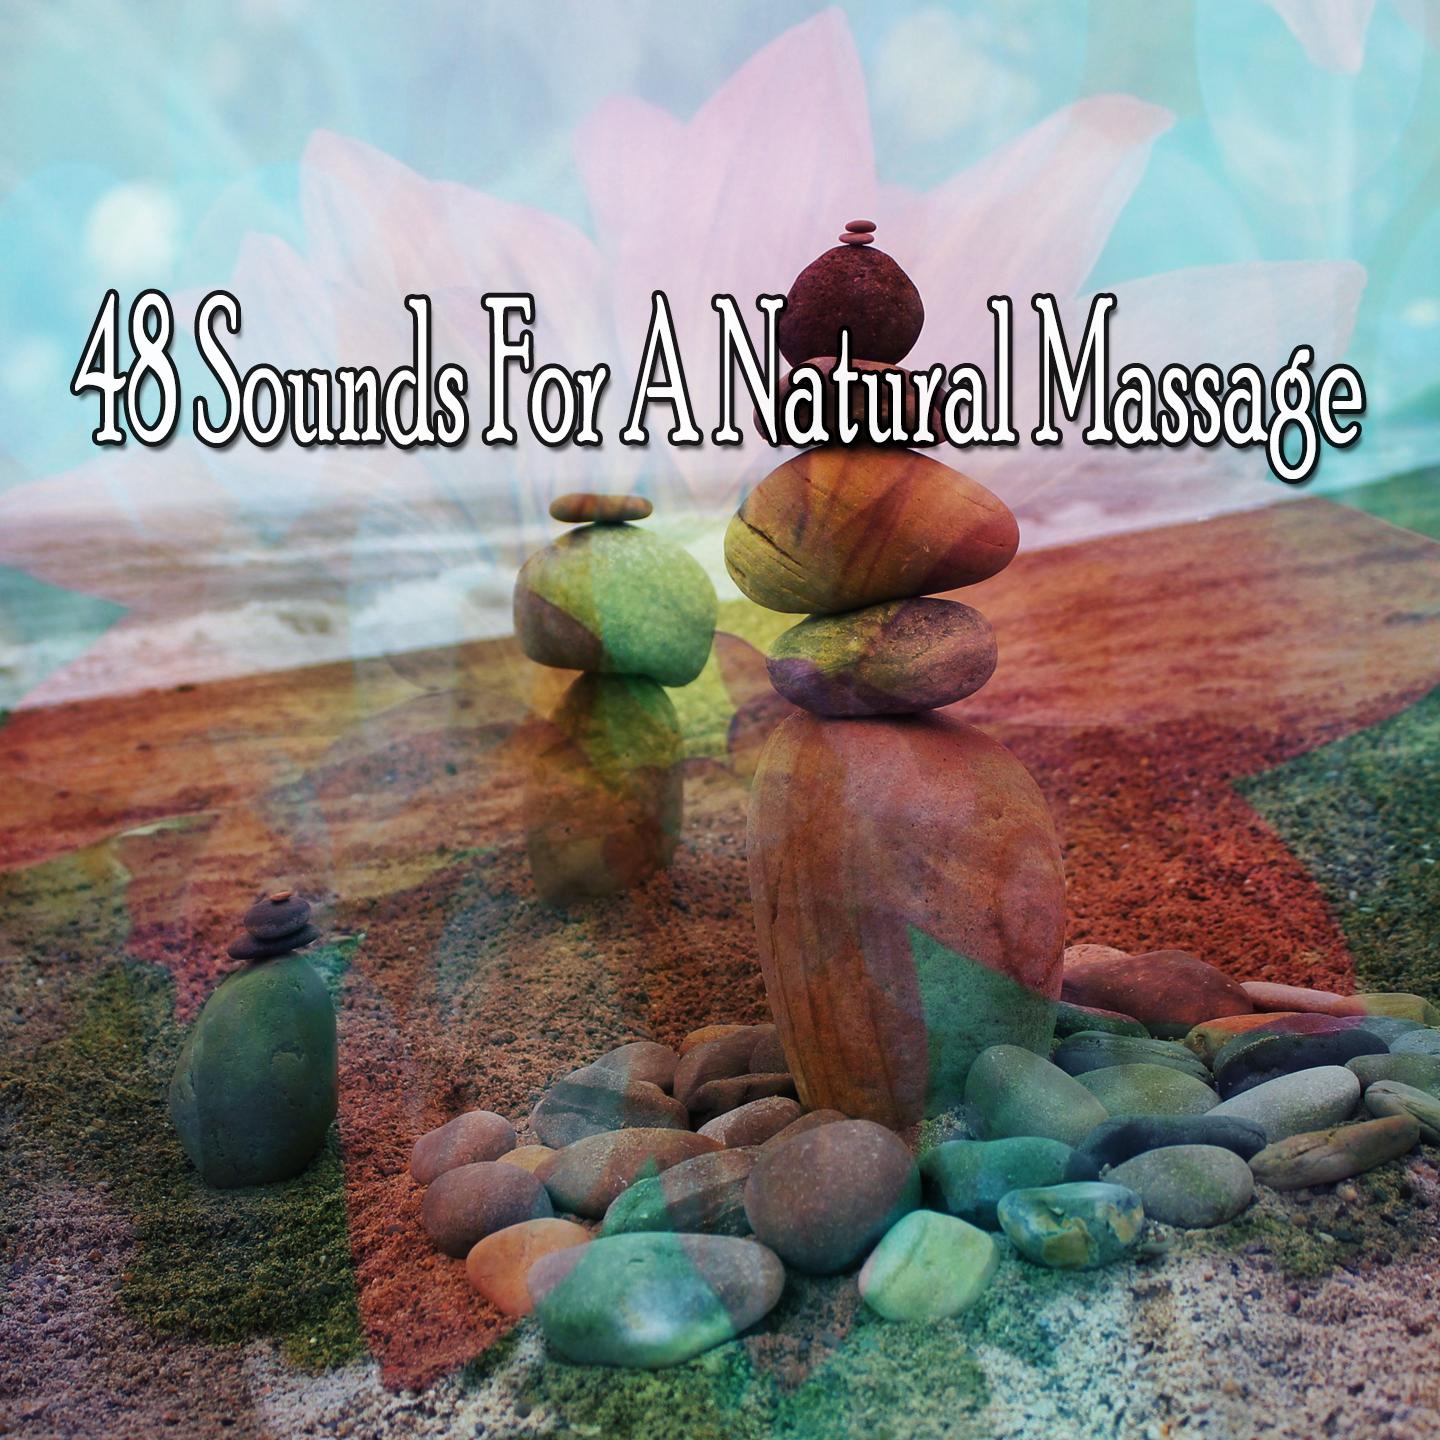 48 Sounds for a Natural Massage